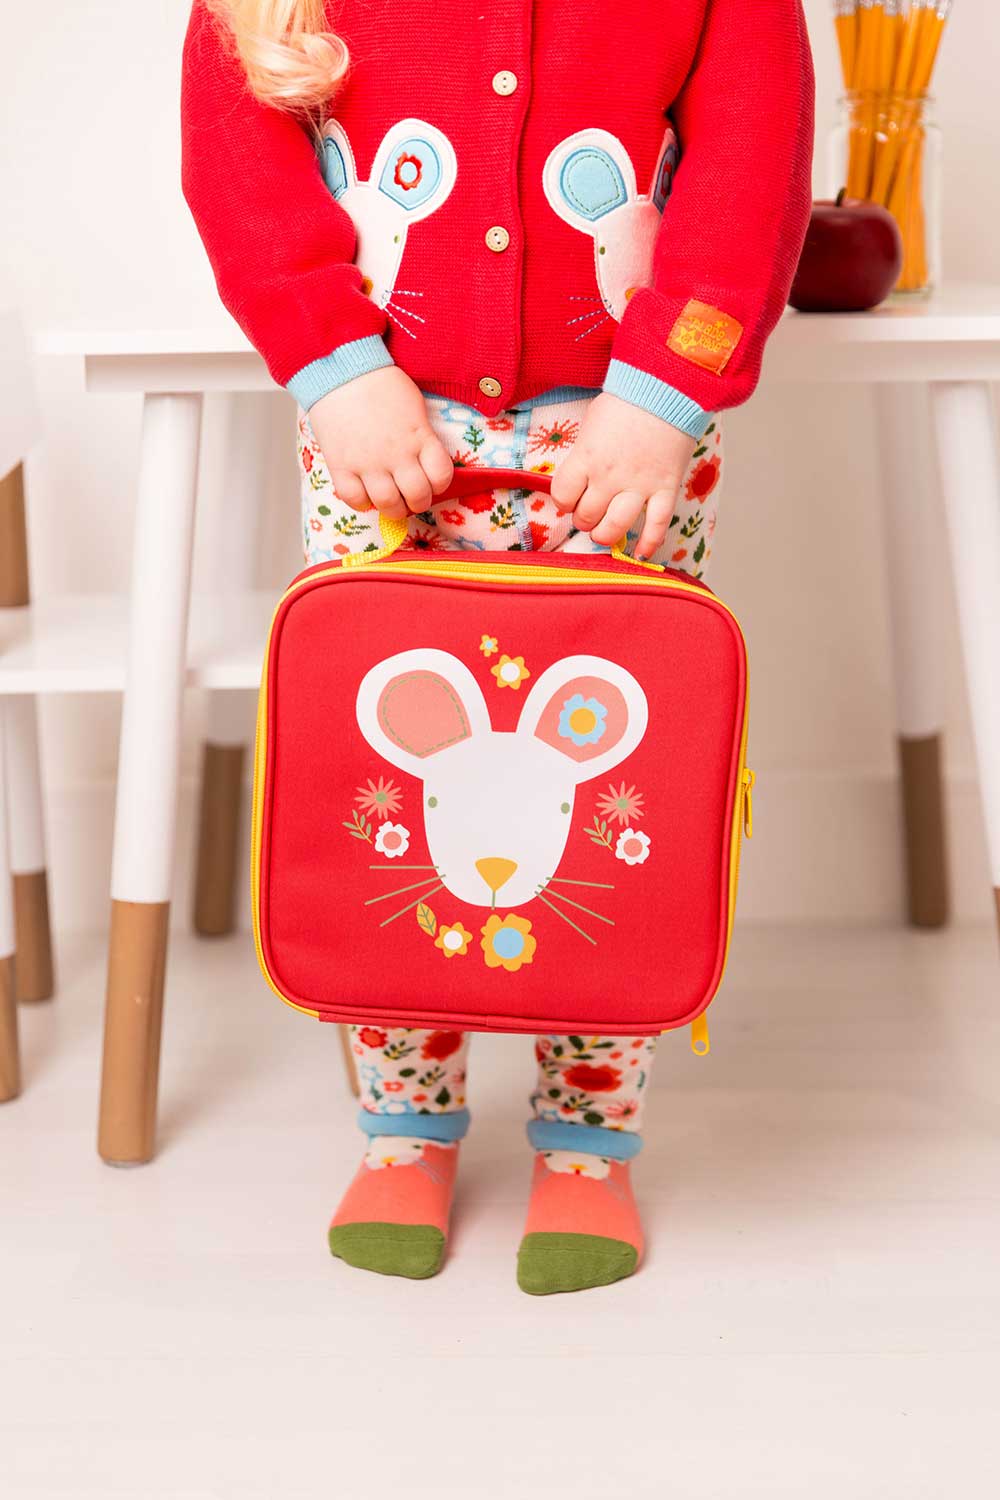 A boy in a red jumper holding a red lunchbox with mouse print on it